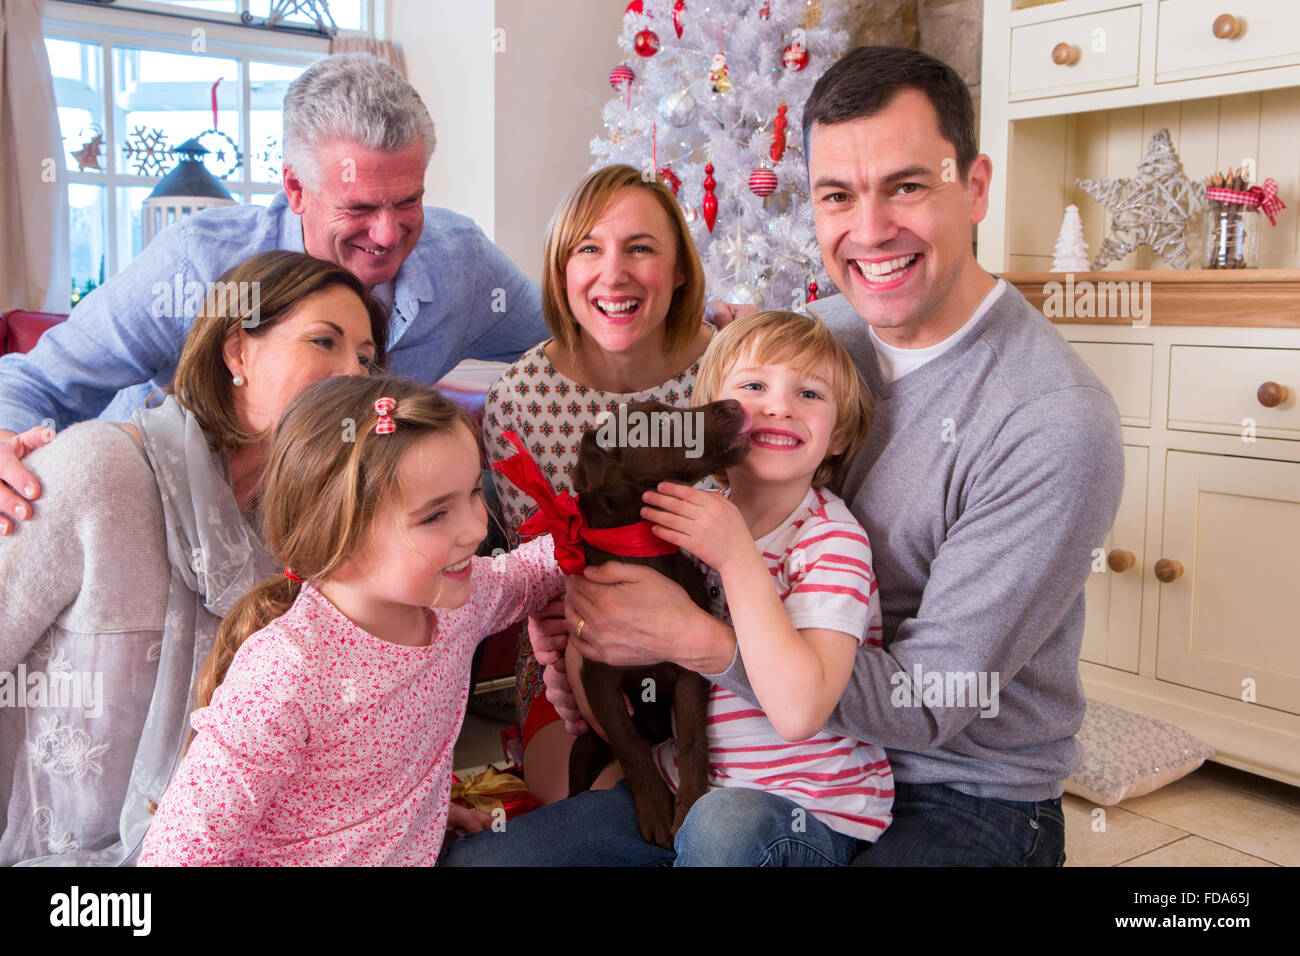 Three Generation Family at Christmas Time. Everyone is smiling and excited about the surprise puppy. Stock Photo